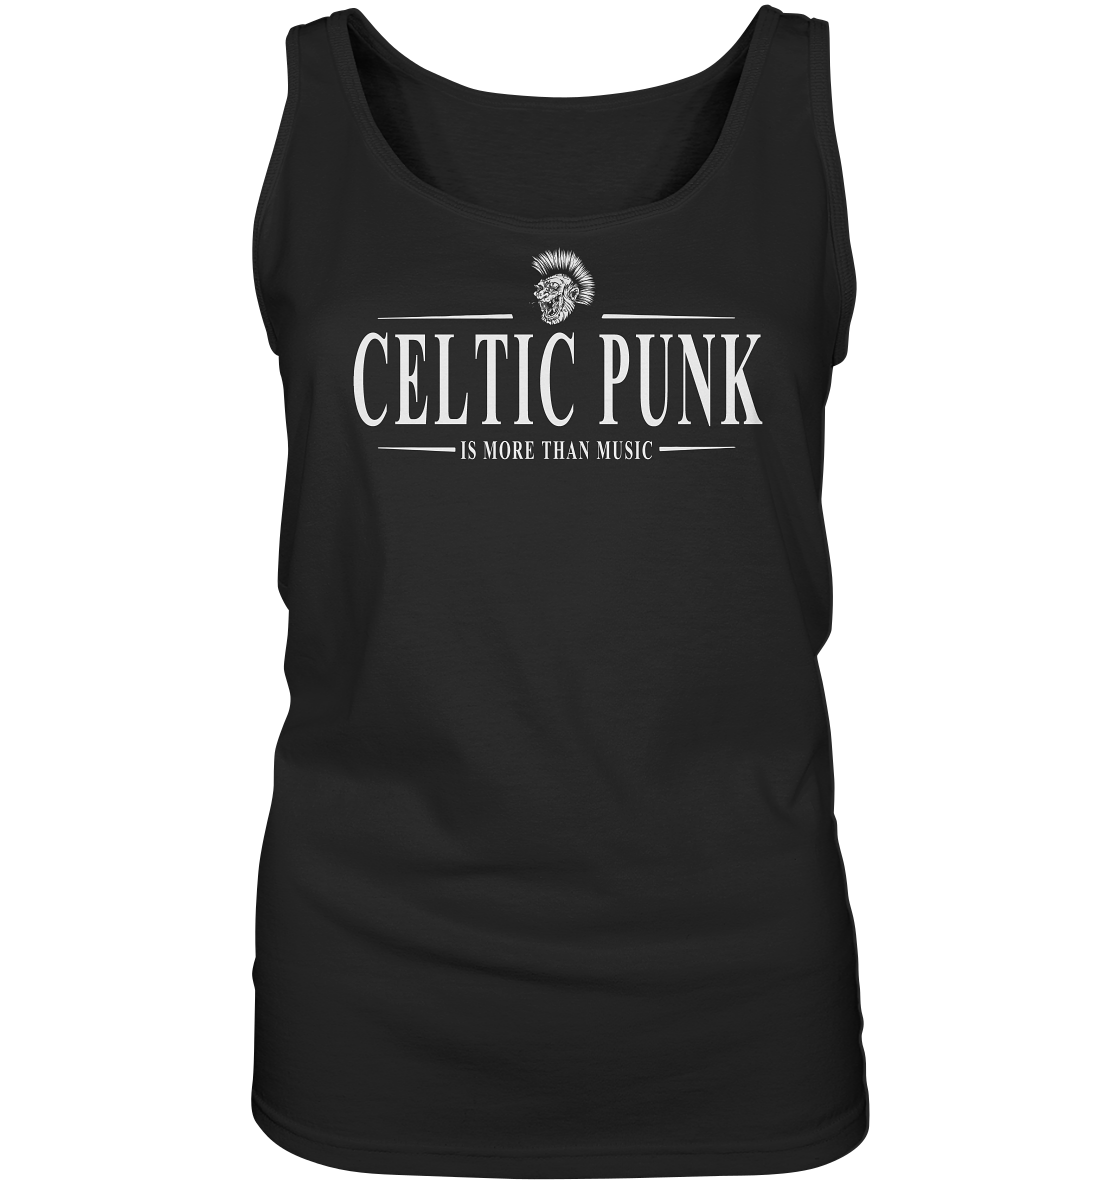 Celtic Punk "Is More Than Music" - Ladies Tank-Top